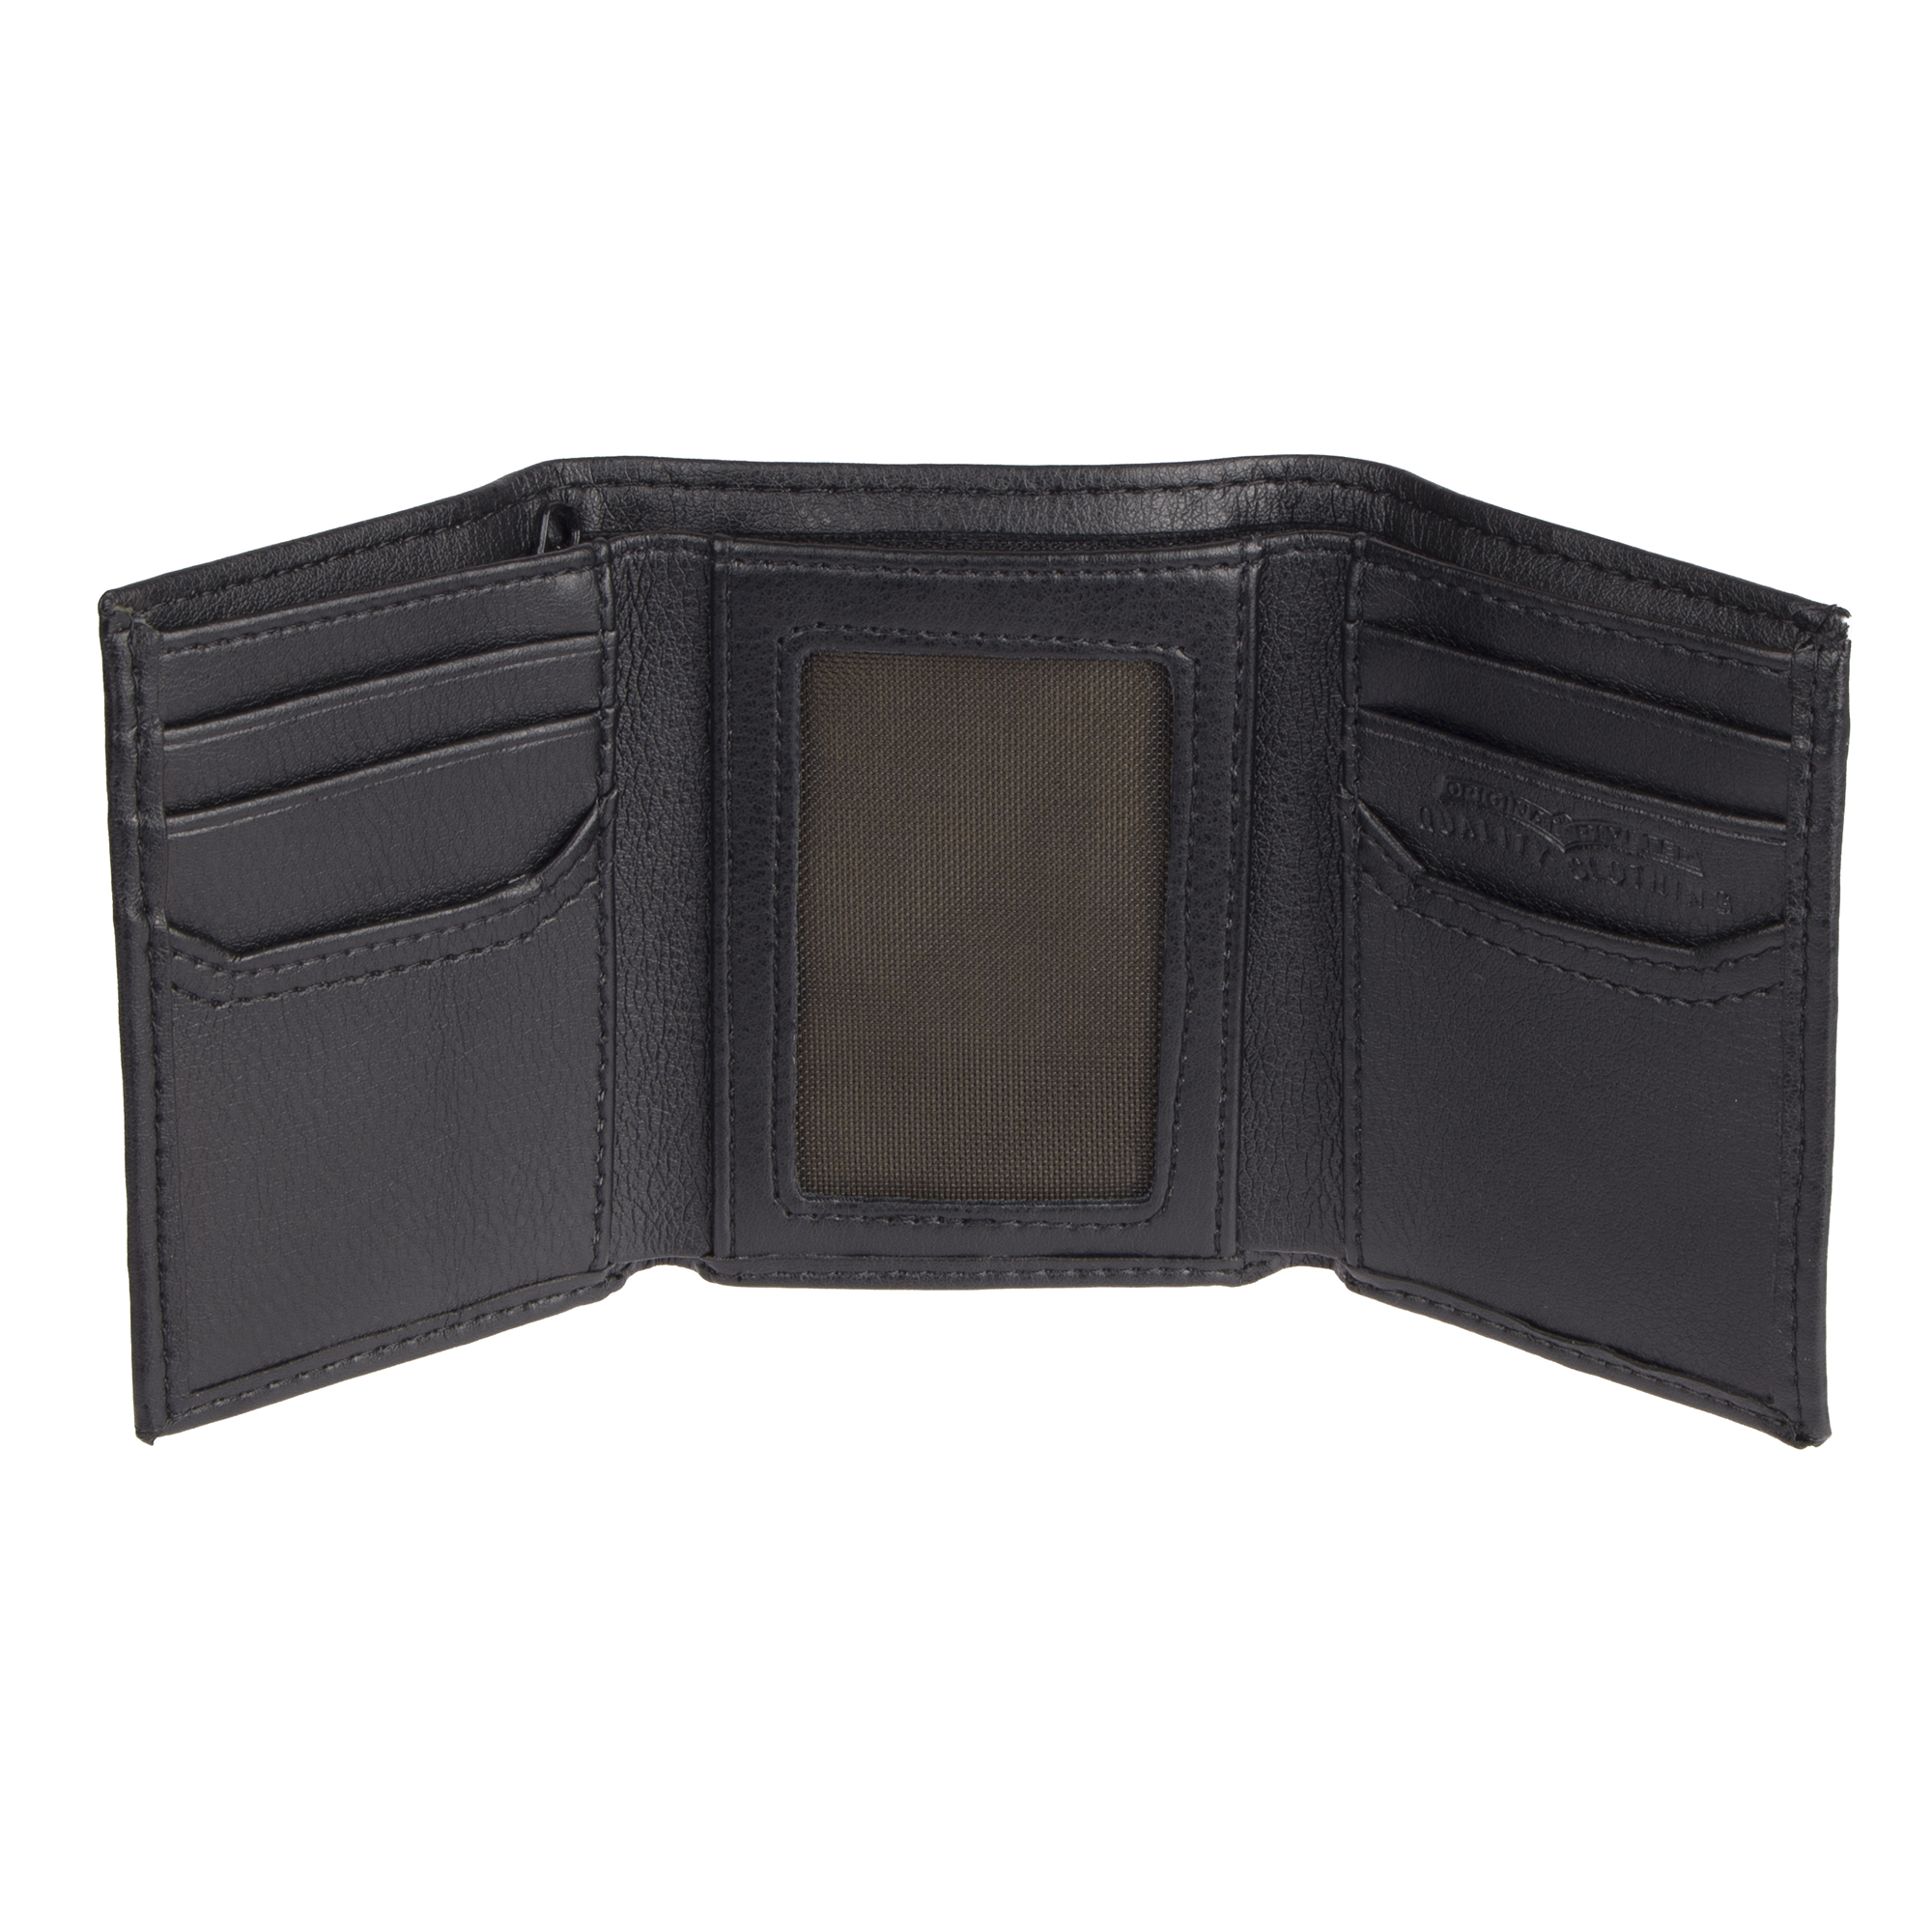 Levi's Men's Black RFID Trifold Wallet with Interior Zipper - image 2 of 5